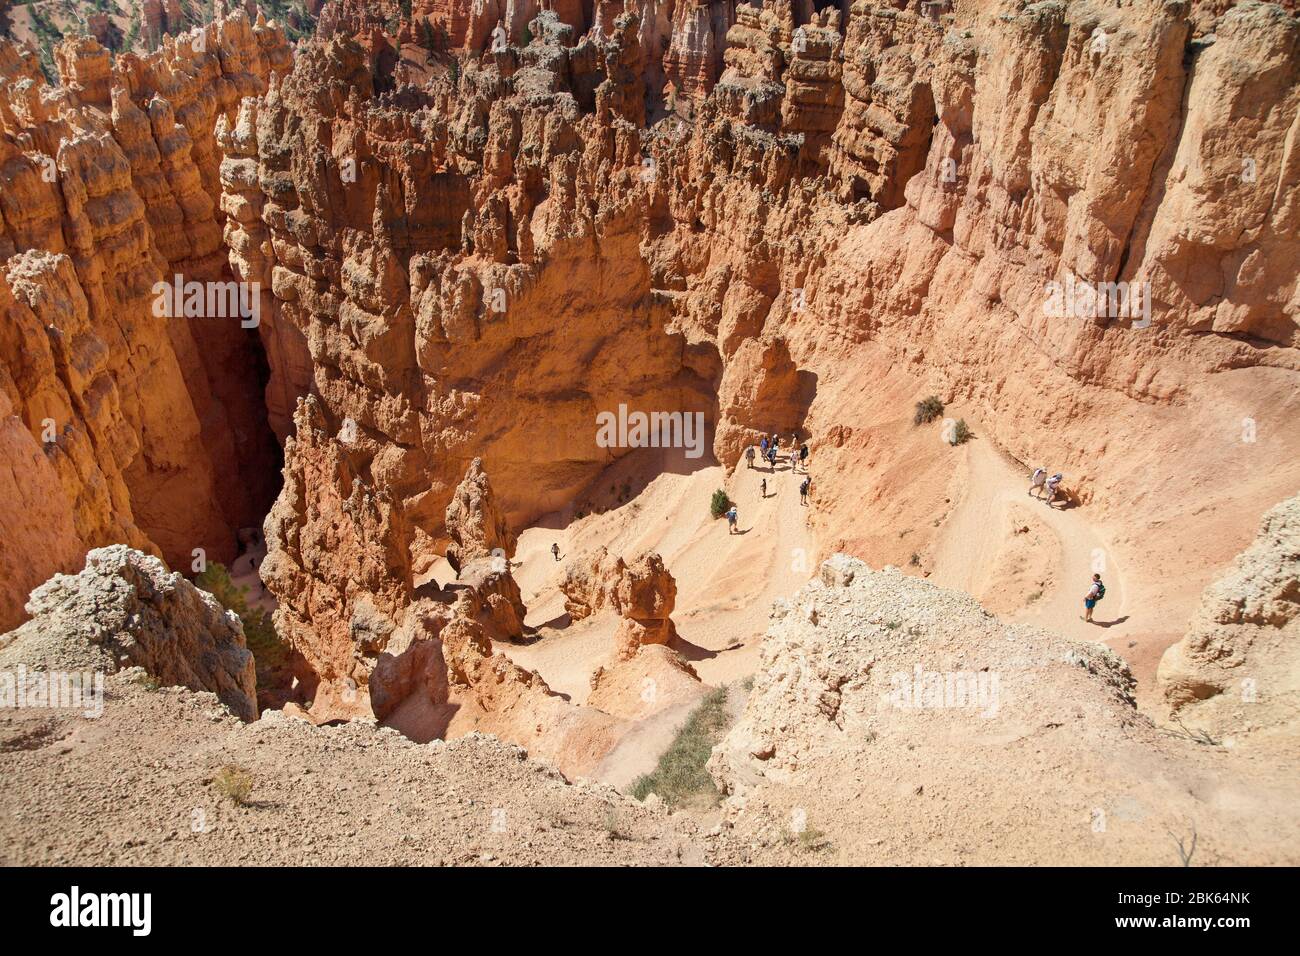 Bryce Canyon National Park, Utah - September 2, 2019: Hikers on Wall Street section of Navajo Loop Trail at Bryce Canyon National Park, Utah, United S Stock Photo